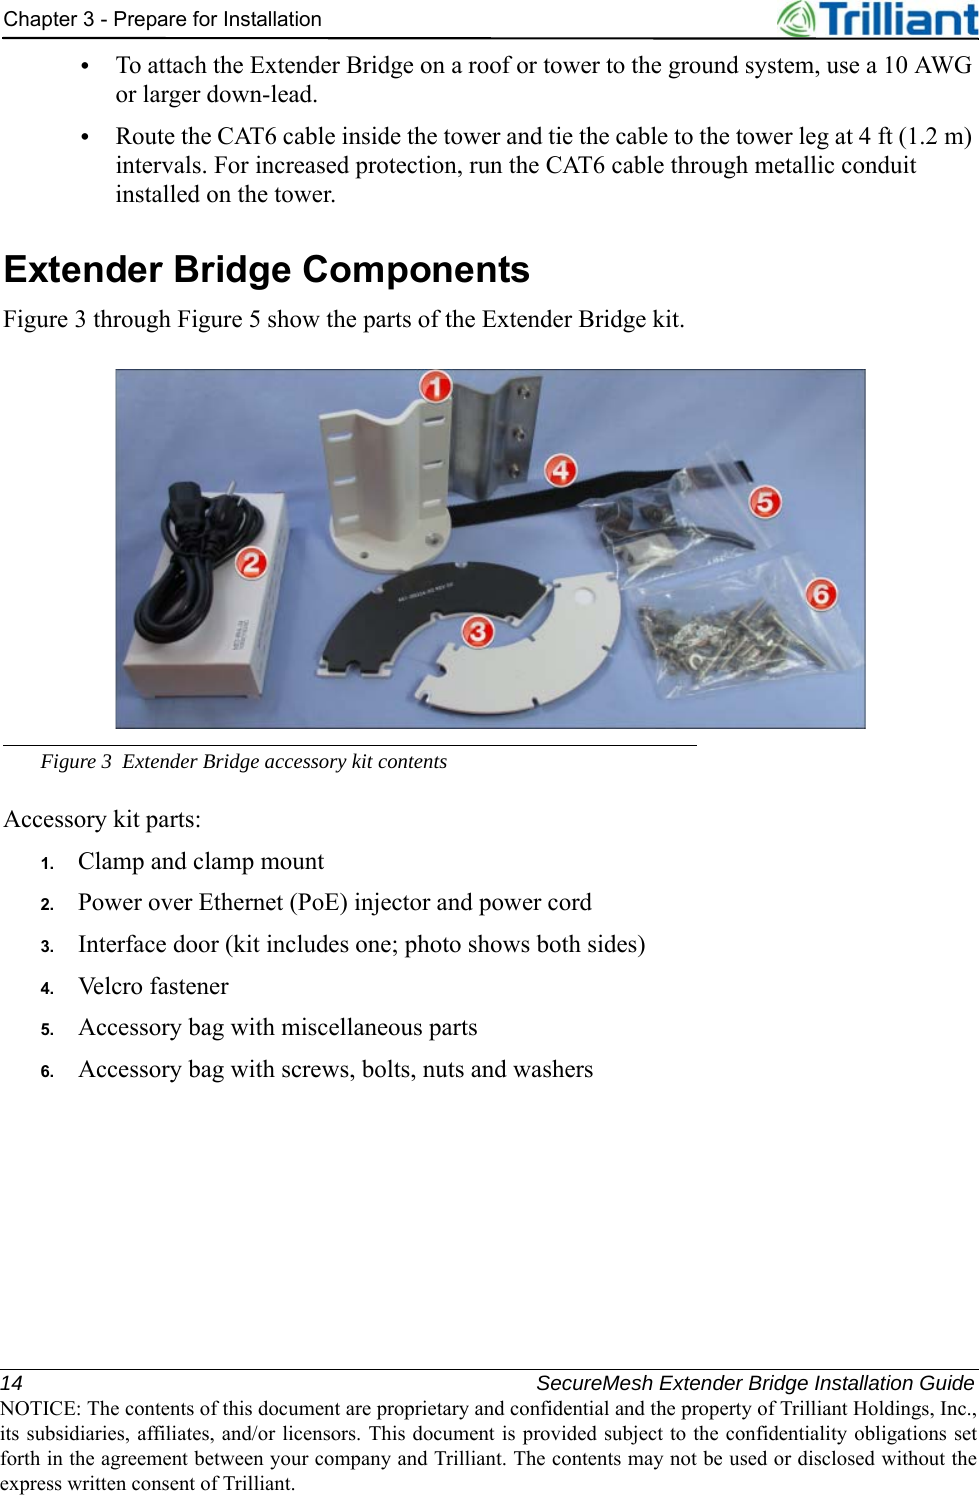 14 SecureMesh Extender Bridge Installation GuideNOTICE: The contents of this document are proprietary and confidential and the property of Trilliant Holdings, Inc.,its subsidiaries, affiliates, and/or licensors. This document is provided subject to the confidentiality obligations setforth in the agreement between your company and Trilliant. The contents may not be used or disclosed without theexpress written consent of Trilliant.Chapter 3 - Prepare for Installation•To attach the Extender Bridge on a roof or tower to the ground system, use a 10 AWG or larger down-lead.•Route the CAT6 cable inside the tower and tie the cable to the tower leg at 4 ft (1.2 m) intervals. For increased protection, run the CAT6 cable through metallic conduit installed on the tower.Extender Bridge ComponentsFigure 3 through Figure 5 show the parts of the Extender Bridge kit.Figure 3 Extender Bridge accessory kit contentsAccessory kit parts:1. Clamp and clamp mount2. Power over Ethernet (PoE) injector and power cord3. Interface door (kit includes one; photo shows both sides)4. Velcro fastener5. Accessory bag with miscellaneous parts6. Accessory bag with screws, bolts, nuts and washers